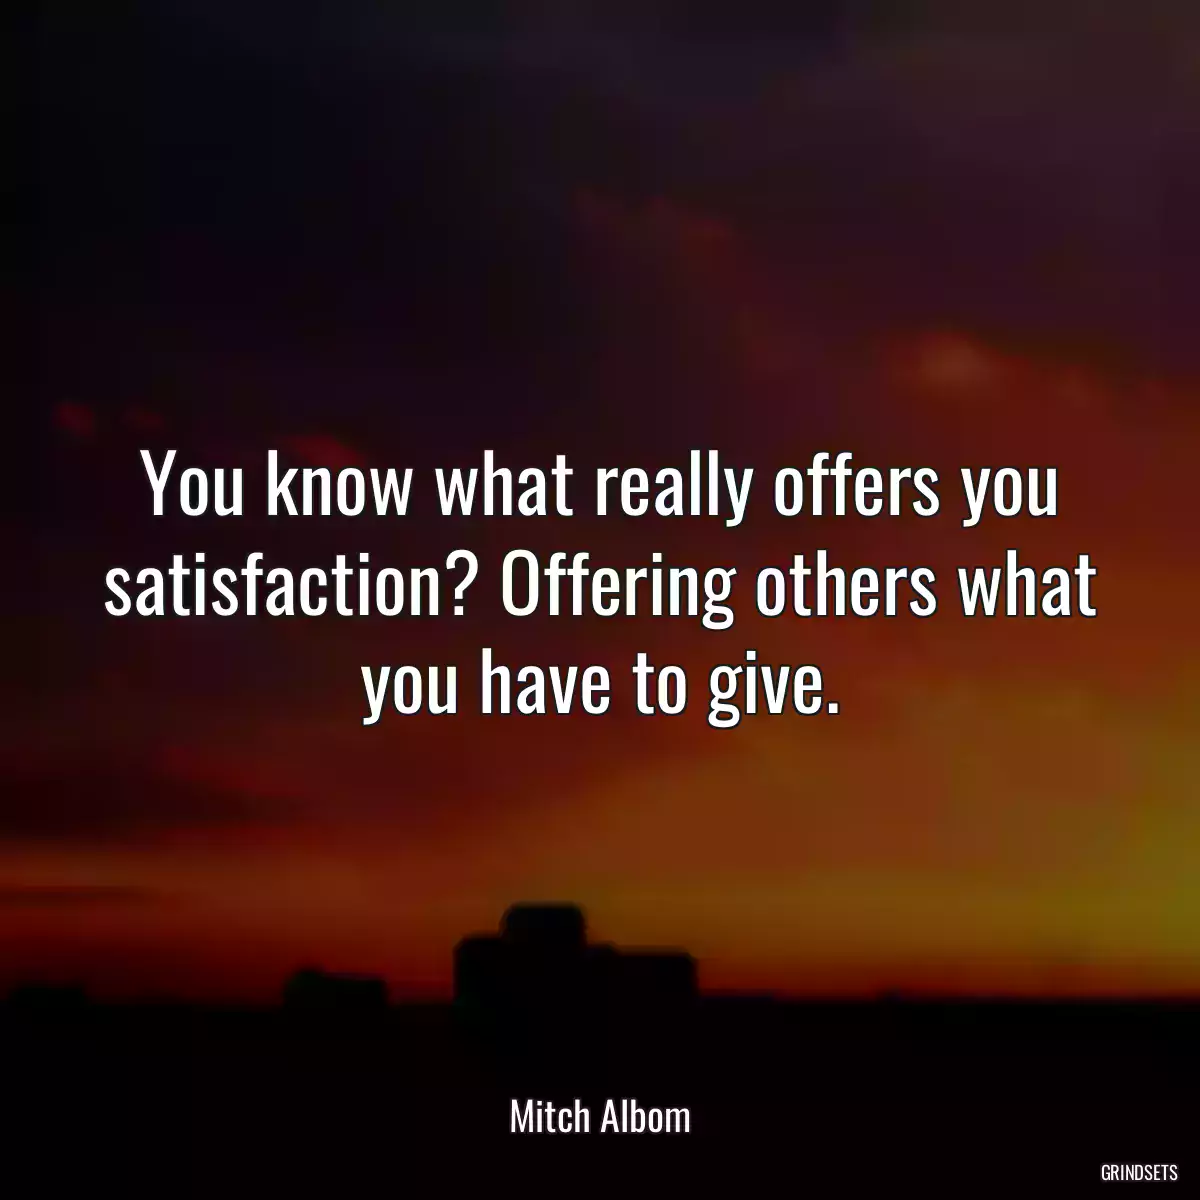 You know what really offers you satisfaction? Offering others what you have to give.